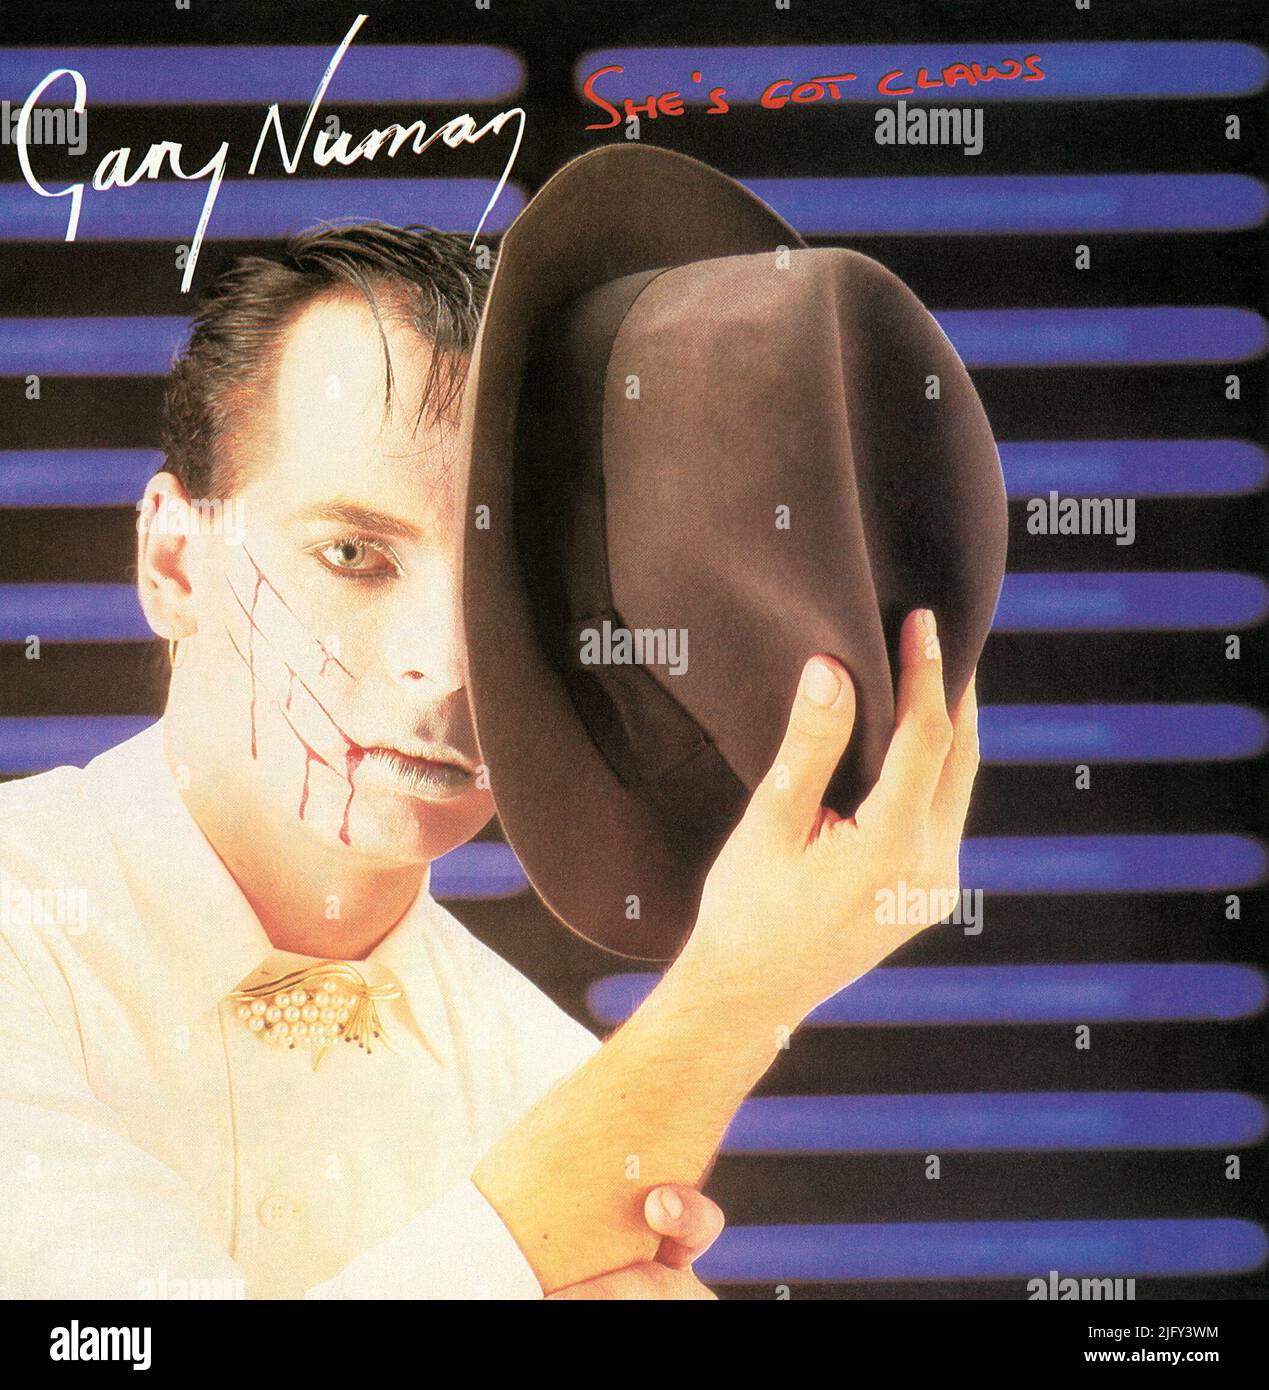 45 RPM 7' UK record label of She's Got Claws by Gary Numan. Written and produced by Gary Numan. Released in August 1981 on Beggars Banquet Records. Stock Photo